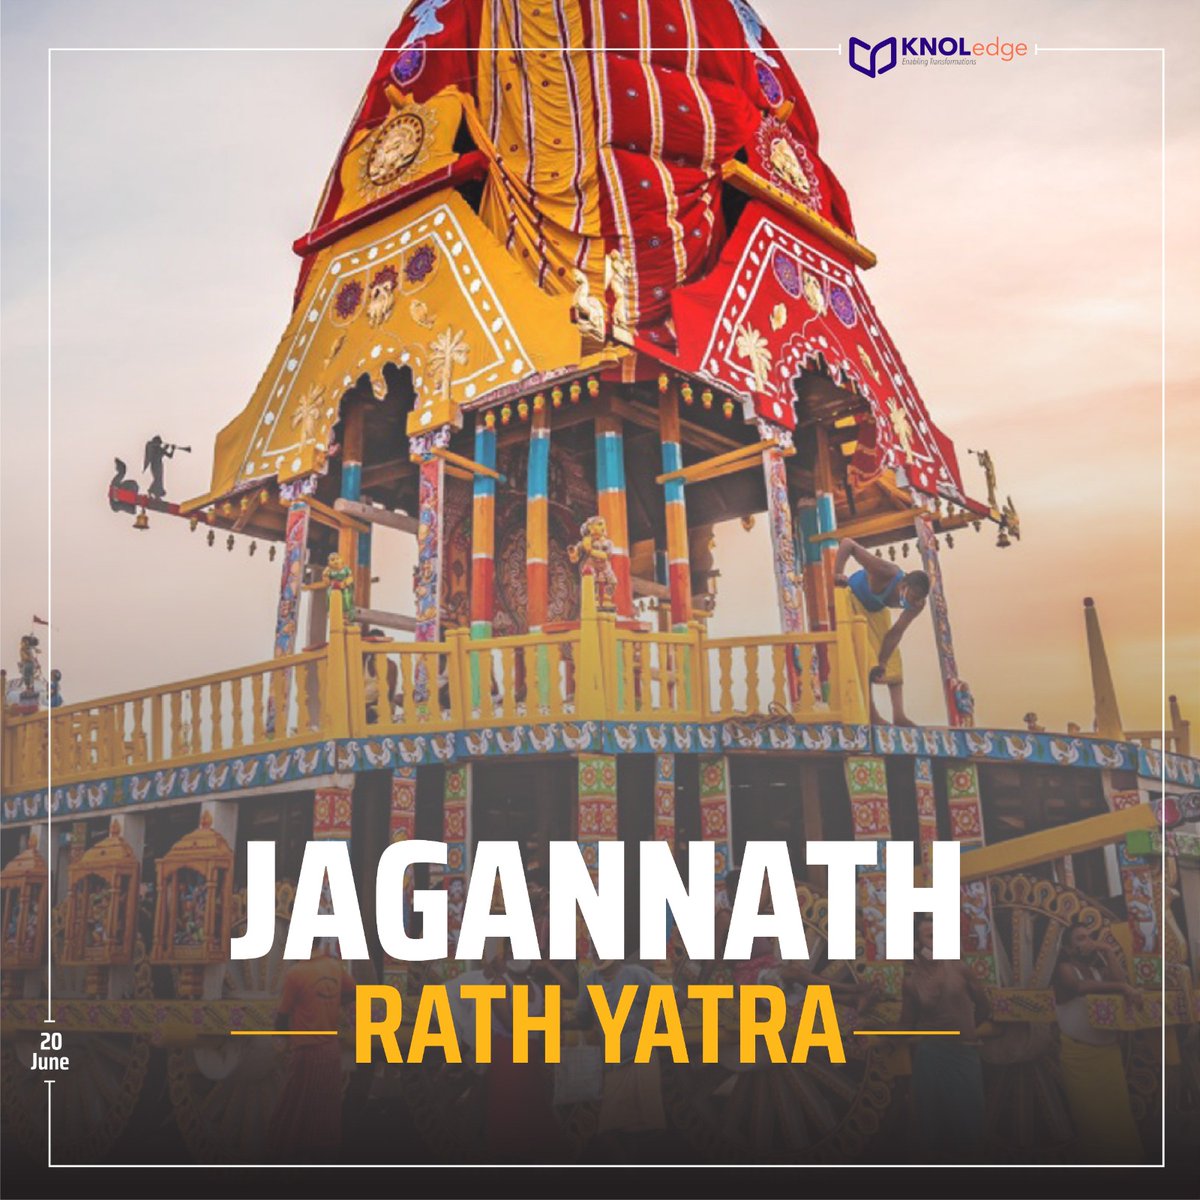 🌺Celebrate #RathYatra, the sacred festival associated with Lord Jagannath in Puri, Odisha. It's a divine journey as the deities embark on a procession of vibrant chariots.🪔 
Witness the historical significance and join the devotional experience. 
#LordJagannath #OdishaCulture